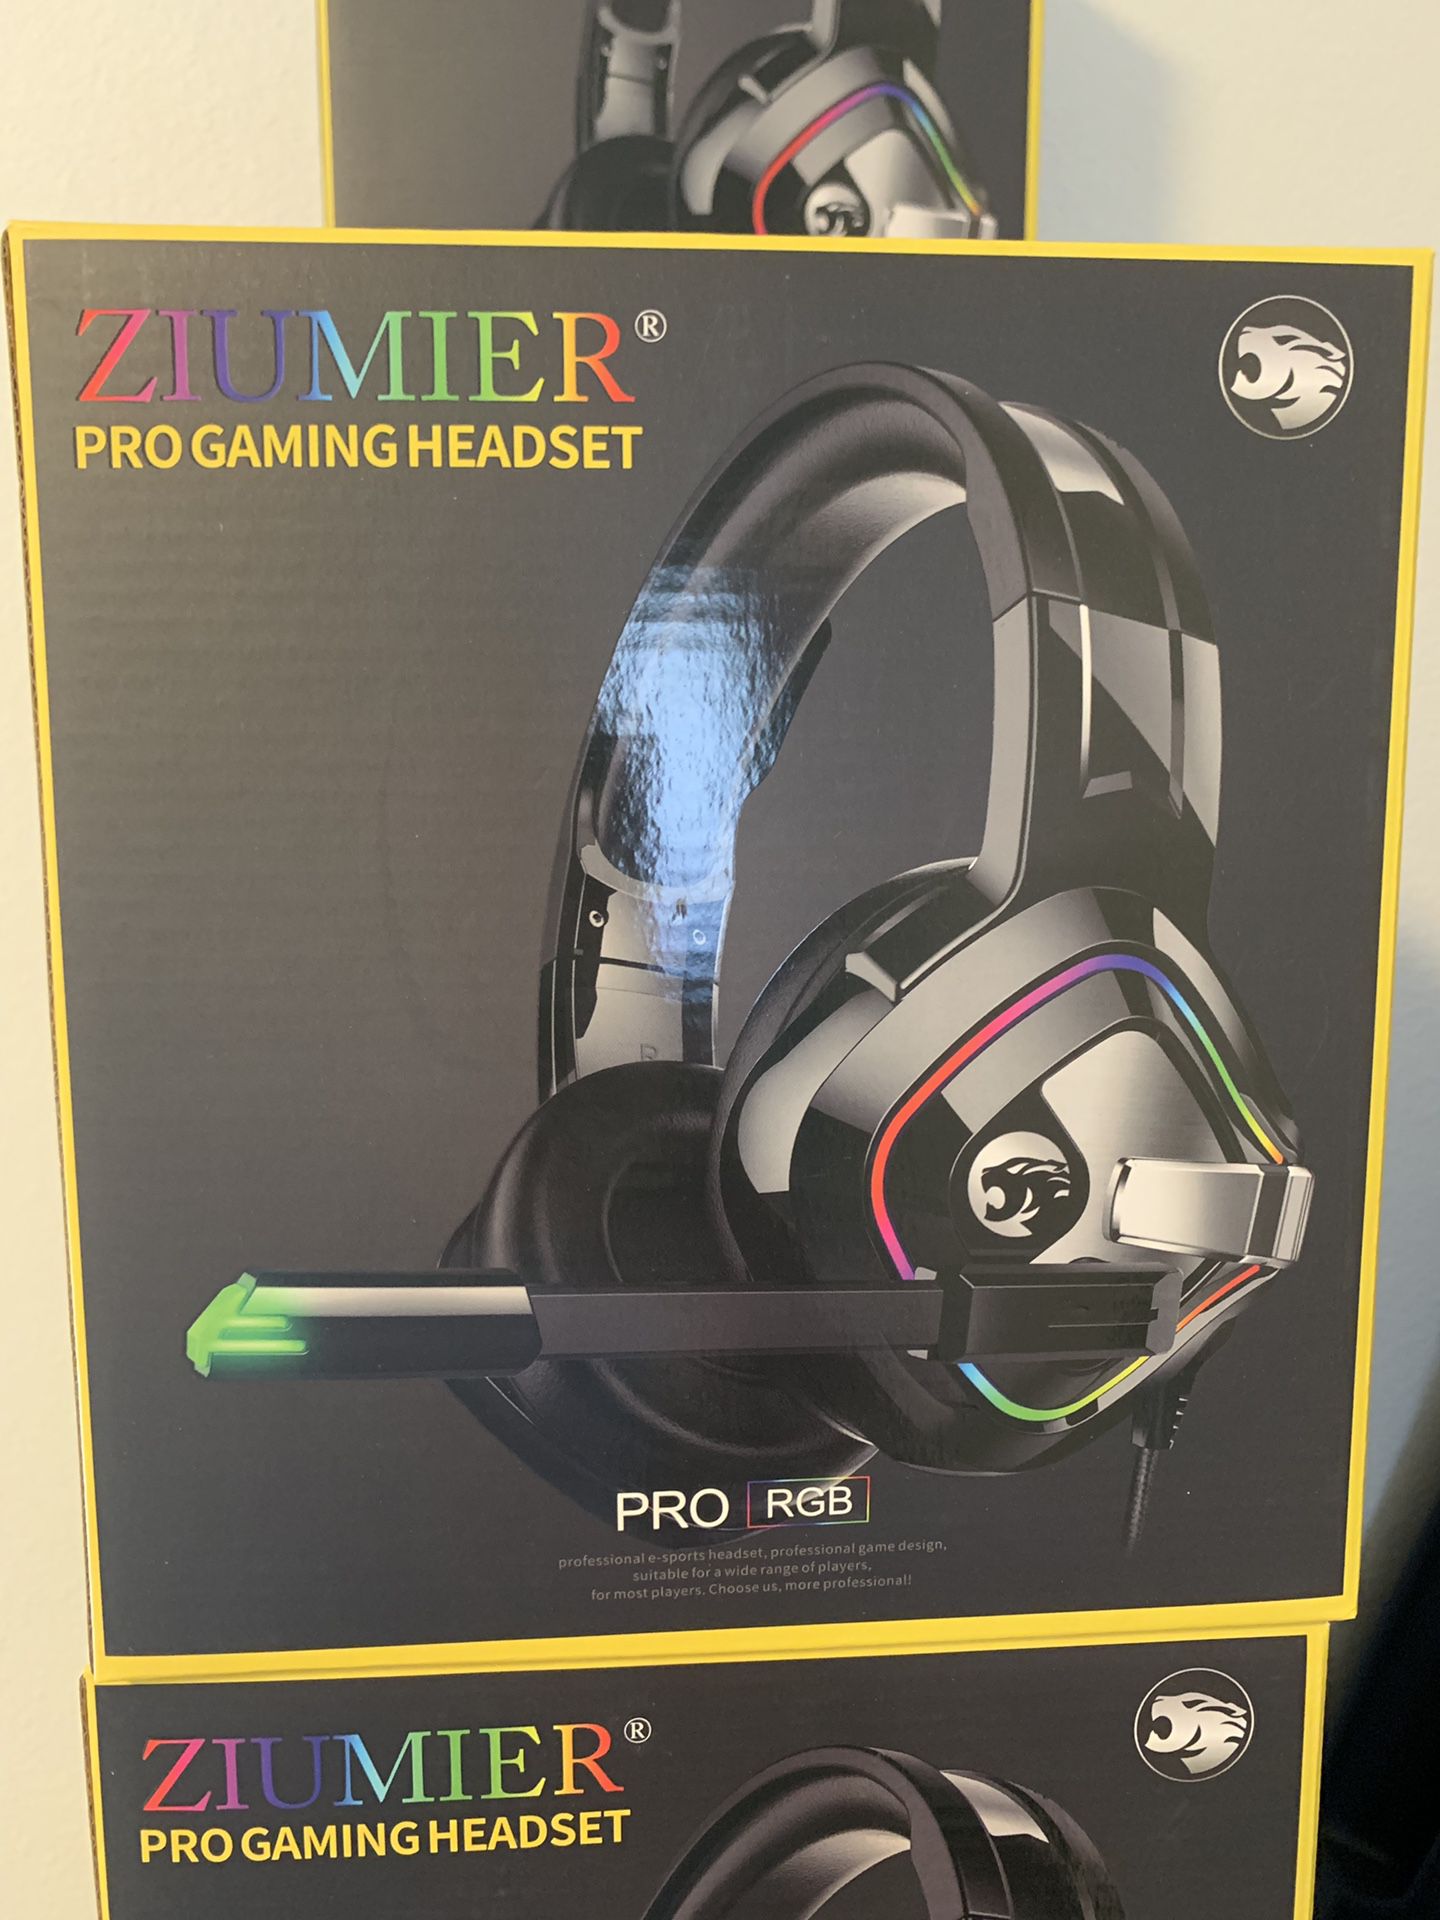 ZIUMIER Gaming Headset Xbox One Headset, PS4 Headset with Noise Canceling Mic and RGB Light, PC Headset with Bass Surround Sound, Over Ear Headphones